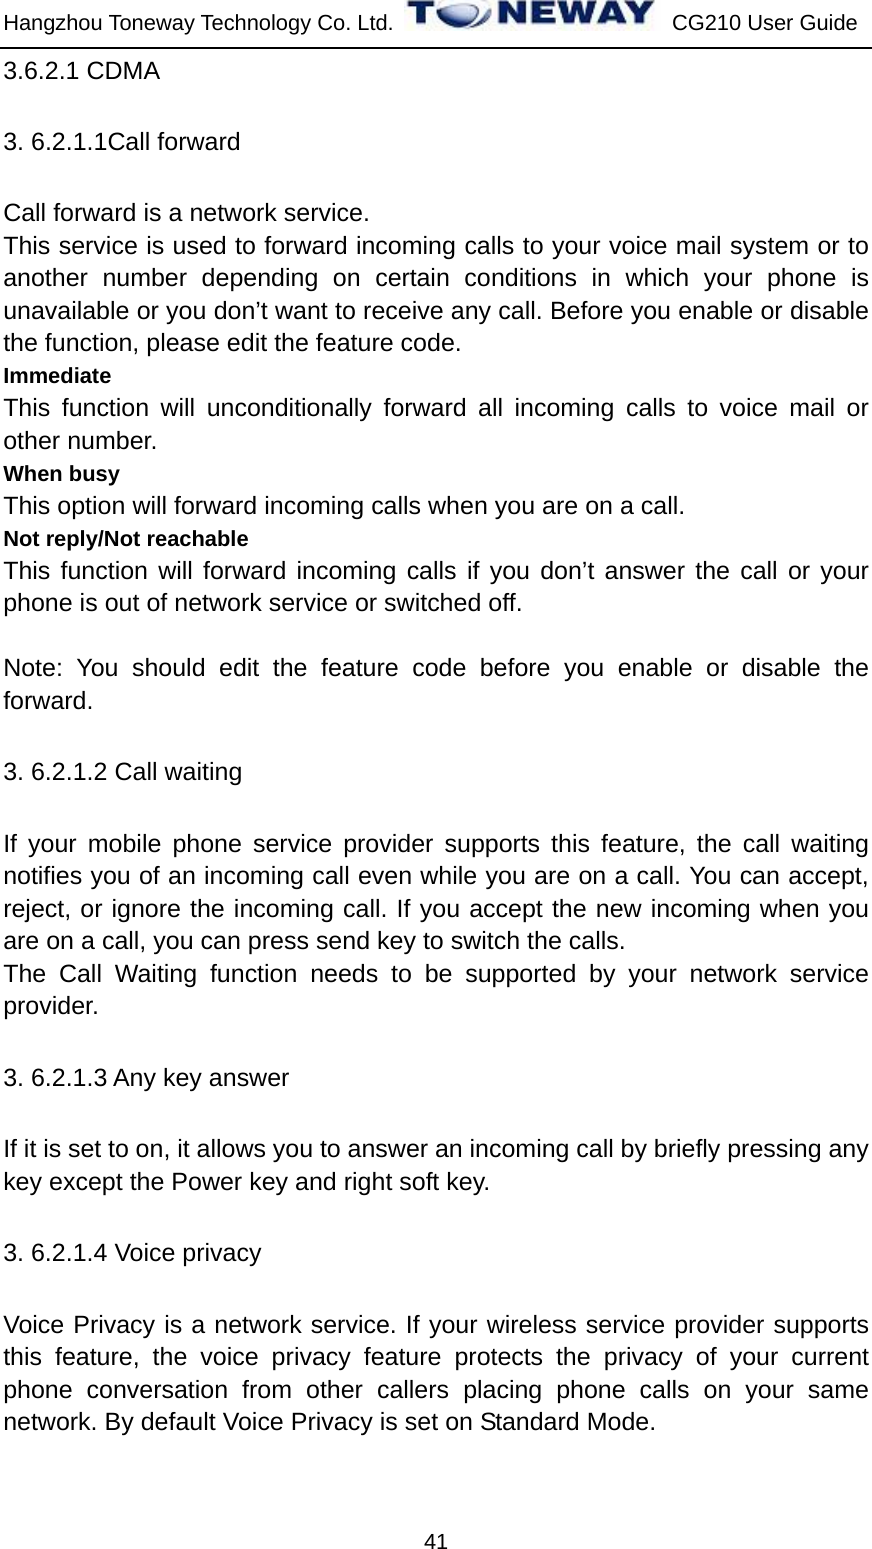 Hangzhou Toneway Technology Co. Ltd.    CG210 User Guide 41 3.6.2.1 CDMA 3. 6.2.1.1Call forward Call forward is a network service.   This service is used to forward incoming calls to your voice mail system or to another number depending on certain conditions in which your phone is unavailable or you don’t want to receive any call. Before you enable or disable   the function, please edit the feature code. Immediate This function will unconditionally forward all incoming calls to voice mail or other number. When busy This option will forward incoming calls when you are on a call. Not reply/Not reachable This function will forward incoming calls if you don’t answer the call or your phone is out of network service or switched off.  Note: You should edit the feature code before you enable or disable the forward. 3. 6.2.1.2 Call waiting   If your mobile phone service provider supports this feature, the call waiting notifies you of an incoming call even while you are on a call. You can accept, reject, or ignore the incoming call. If you accept the new incoming when you are on a call, you can press send key to switch the calls. The Call Waiting function needs to be supported by your network service provider. 3. 6.2.1.3 Any key answer If it is set to on, it allows you to answer an incoming call by briefly pressing any key except the Power key and right soft key. 3. 6.2.1.4 Voice privacy Voice Privacy is a network service. If your wireless service provider supports this feature, the voice privacy feature protects the privacy of your current phone conversation from other callers placing phone calls on your same network. By default Voice Privacy is set on Standard Mode. 